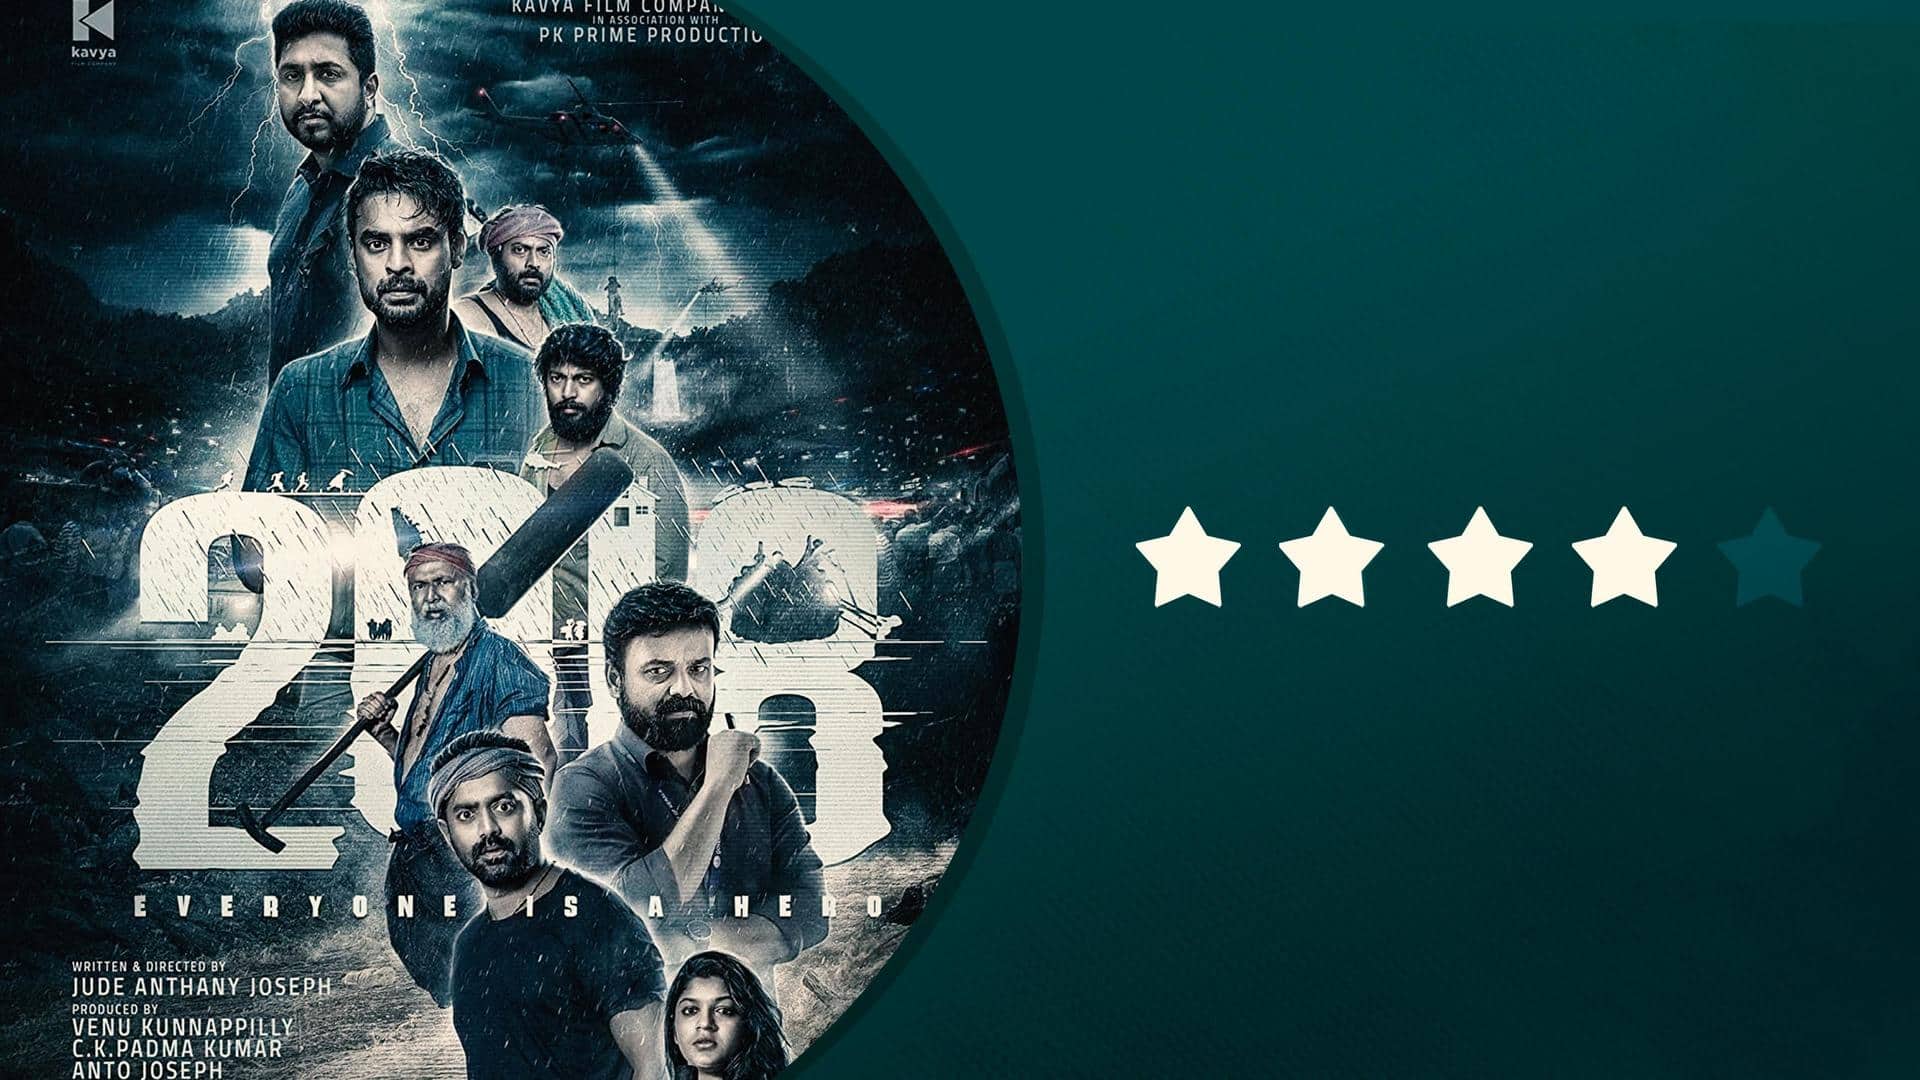 '2018' Hindi review: Immaculately-shot survival thriller with powerful emotional undercurrents